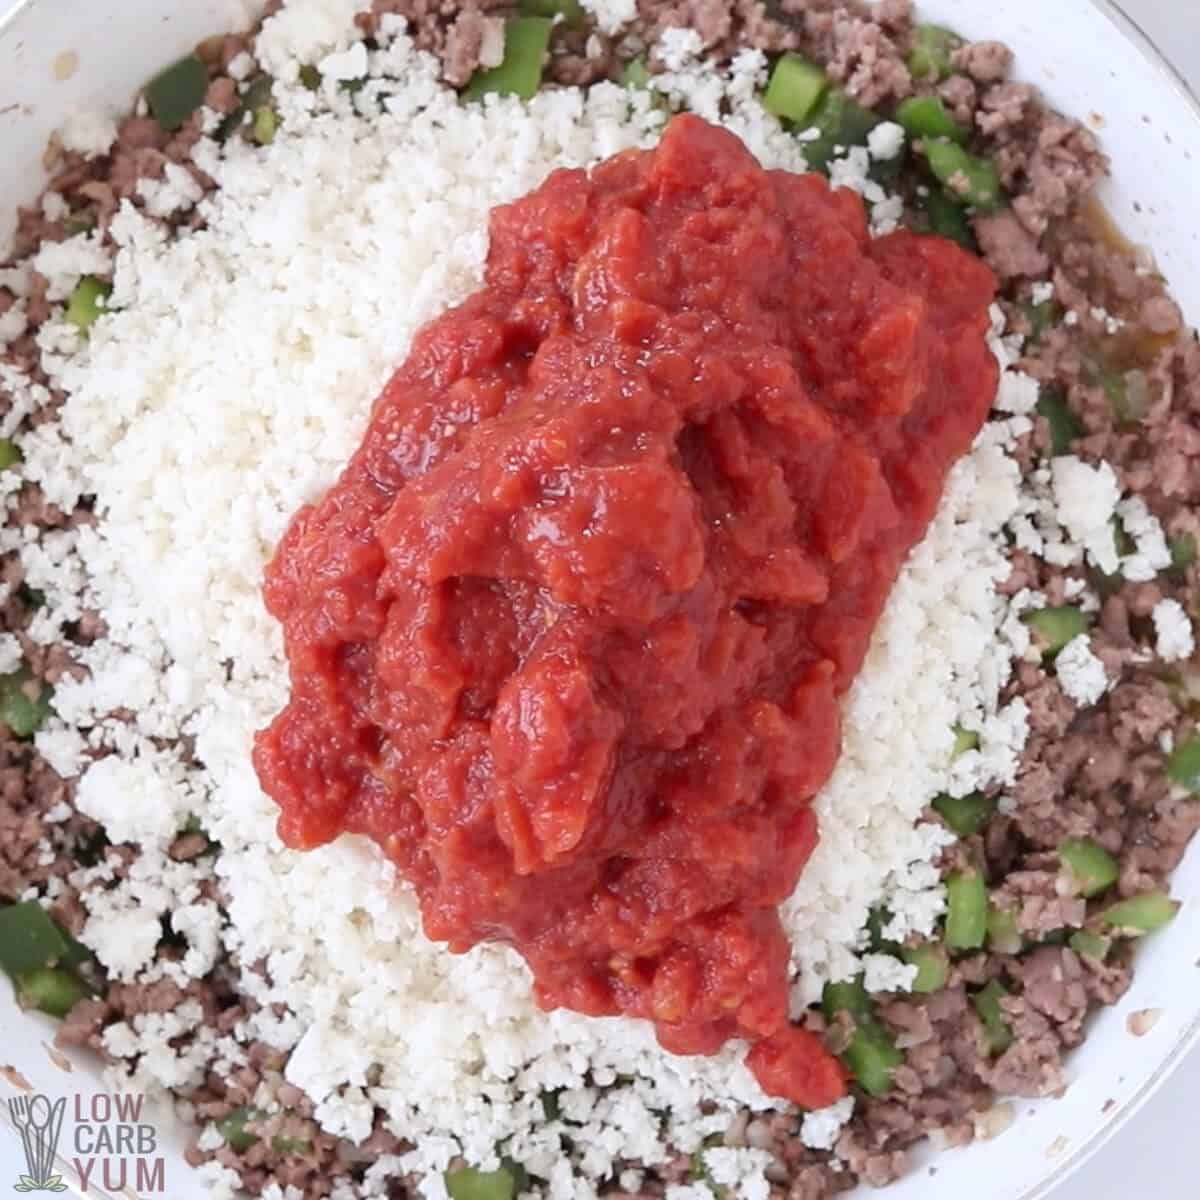 adding cauliflower rice and canned tomatoes to the meat mixture